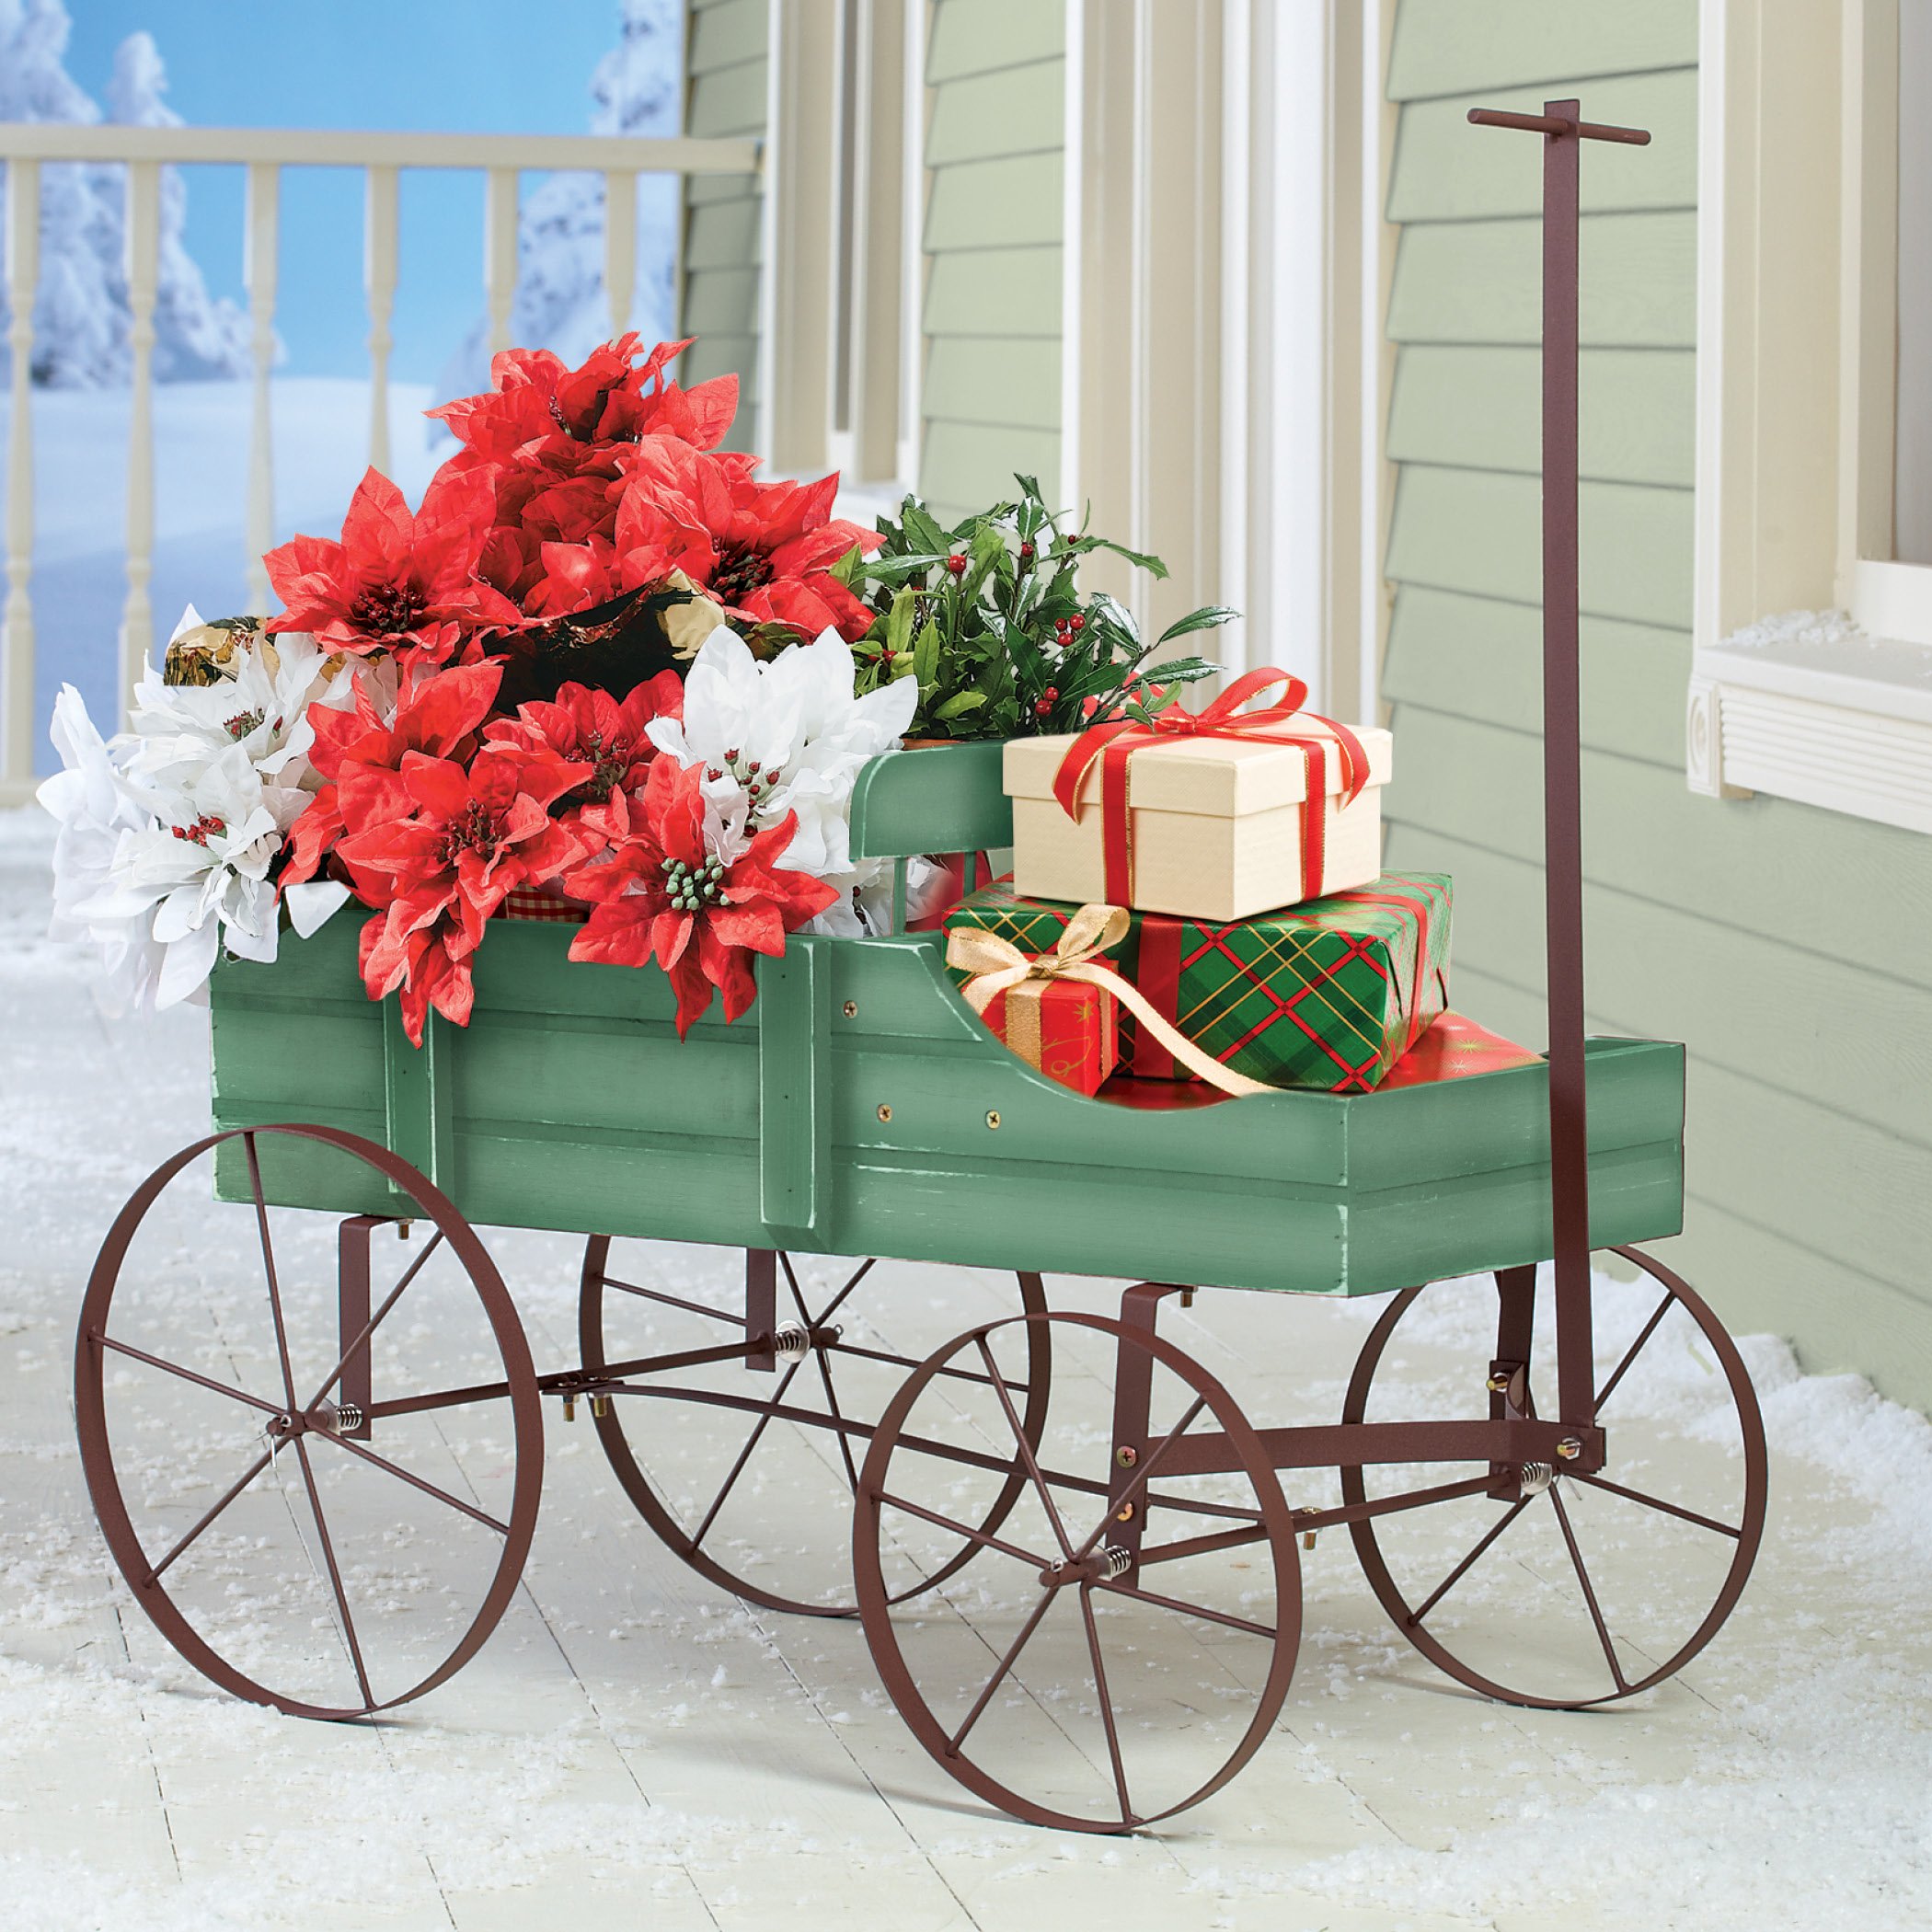 Collections Etc Amish Wagon Indoor/Outdoor Decorative Planter - Green - image 2 of 4